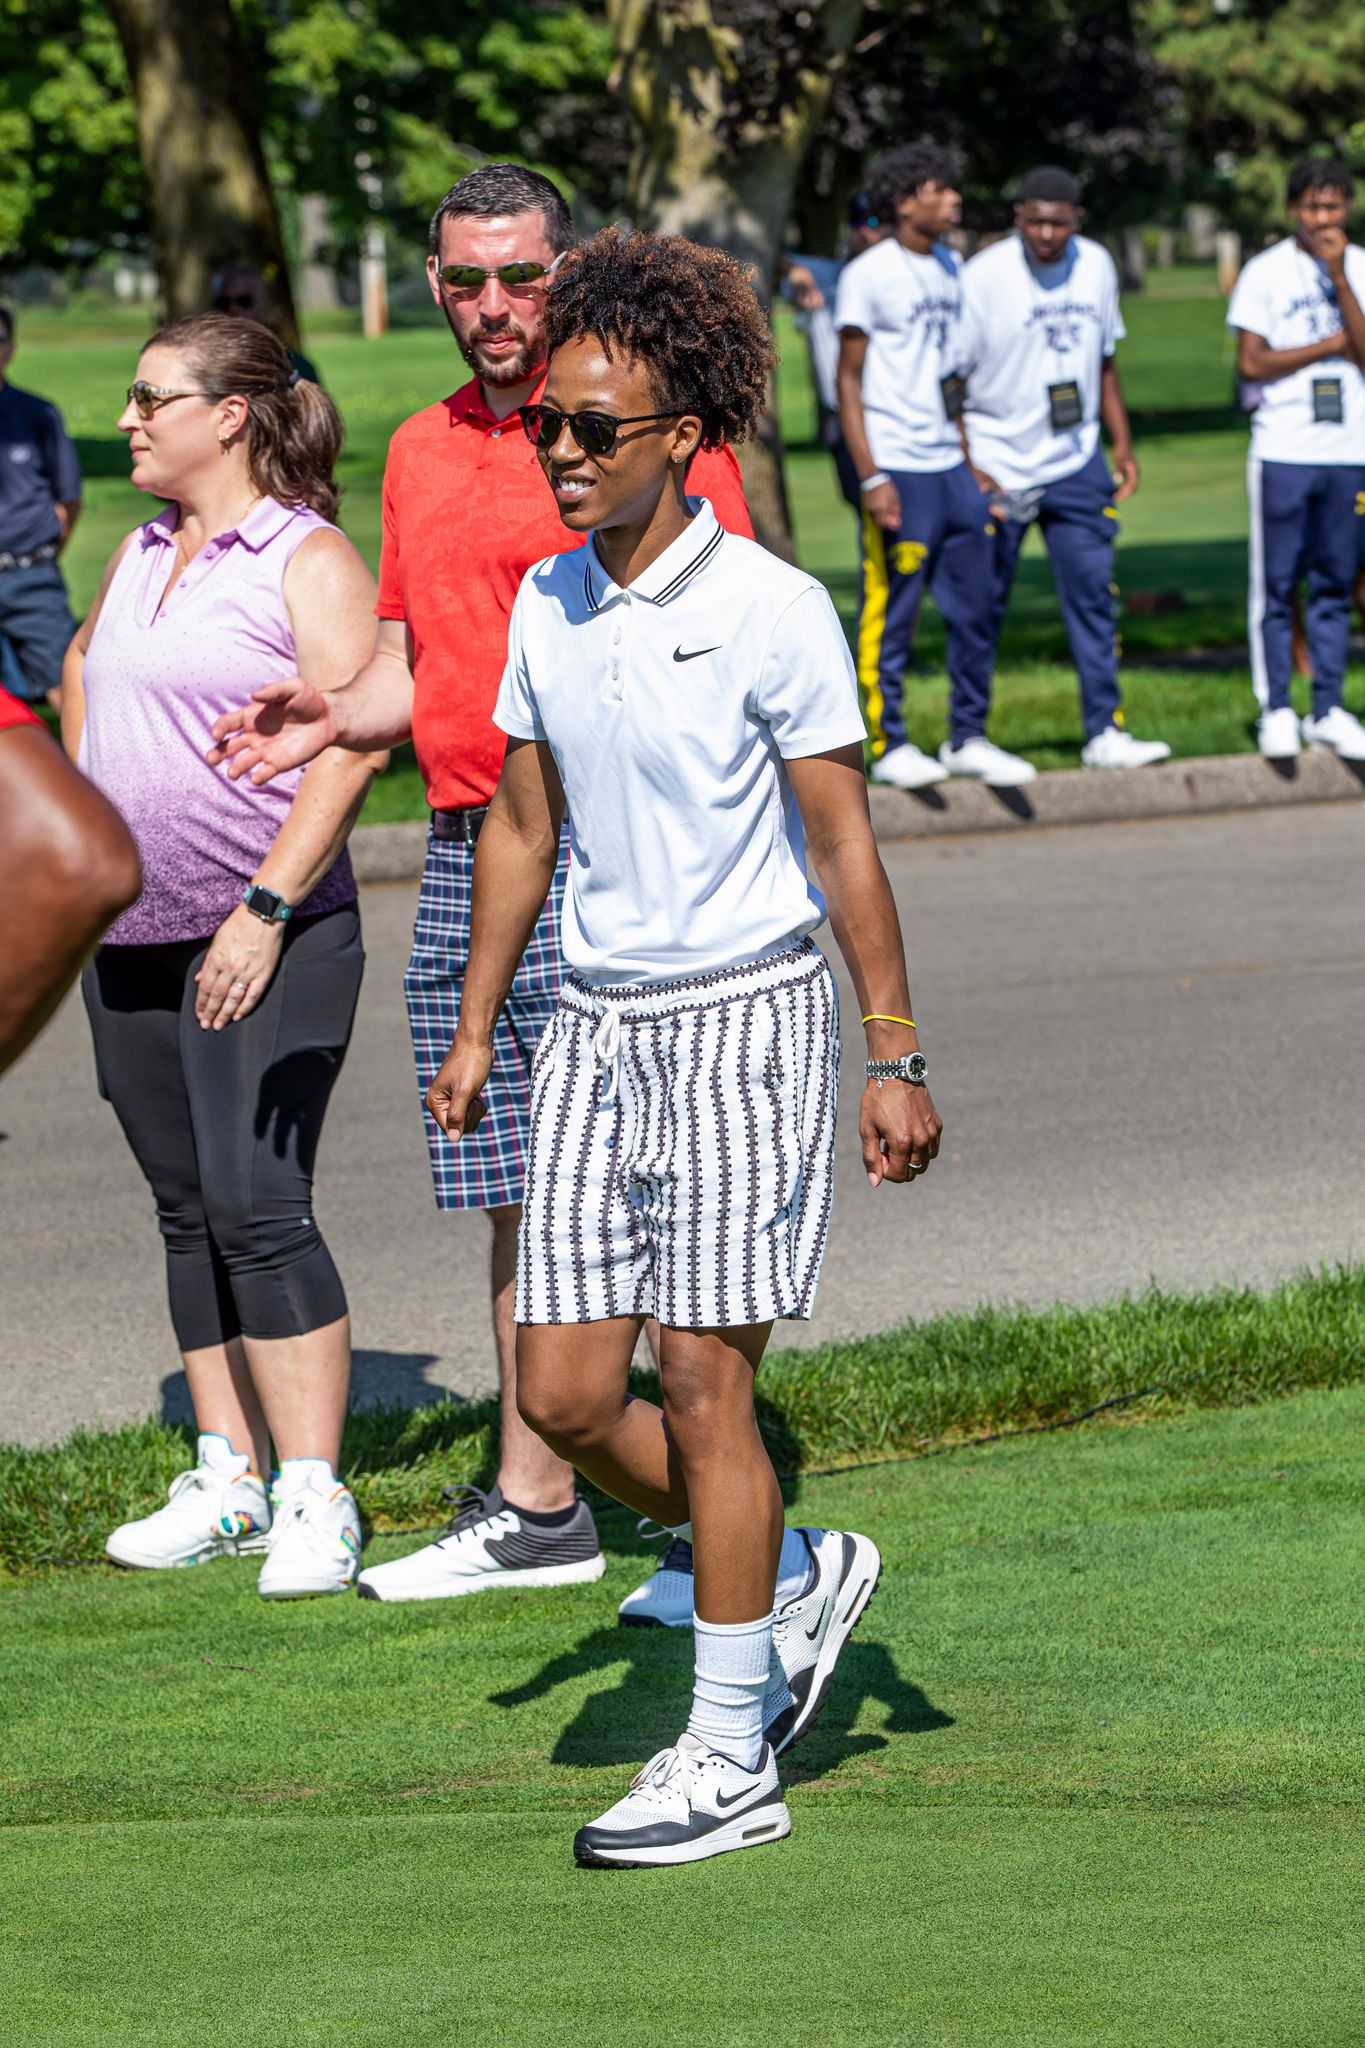 Sadena Parks walks up at the opening ceremonies at the Jalen Rose Golf Classic, A PGD Global Production held at Detroit Golf Club.